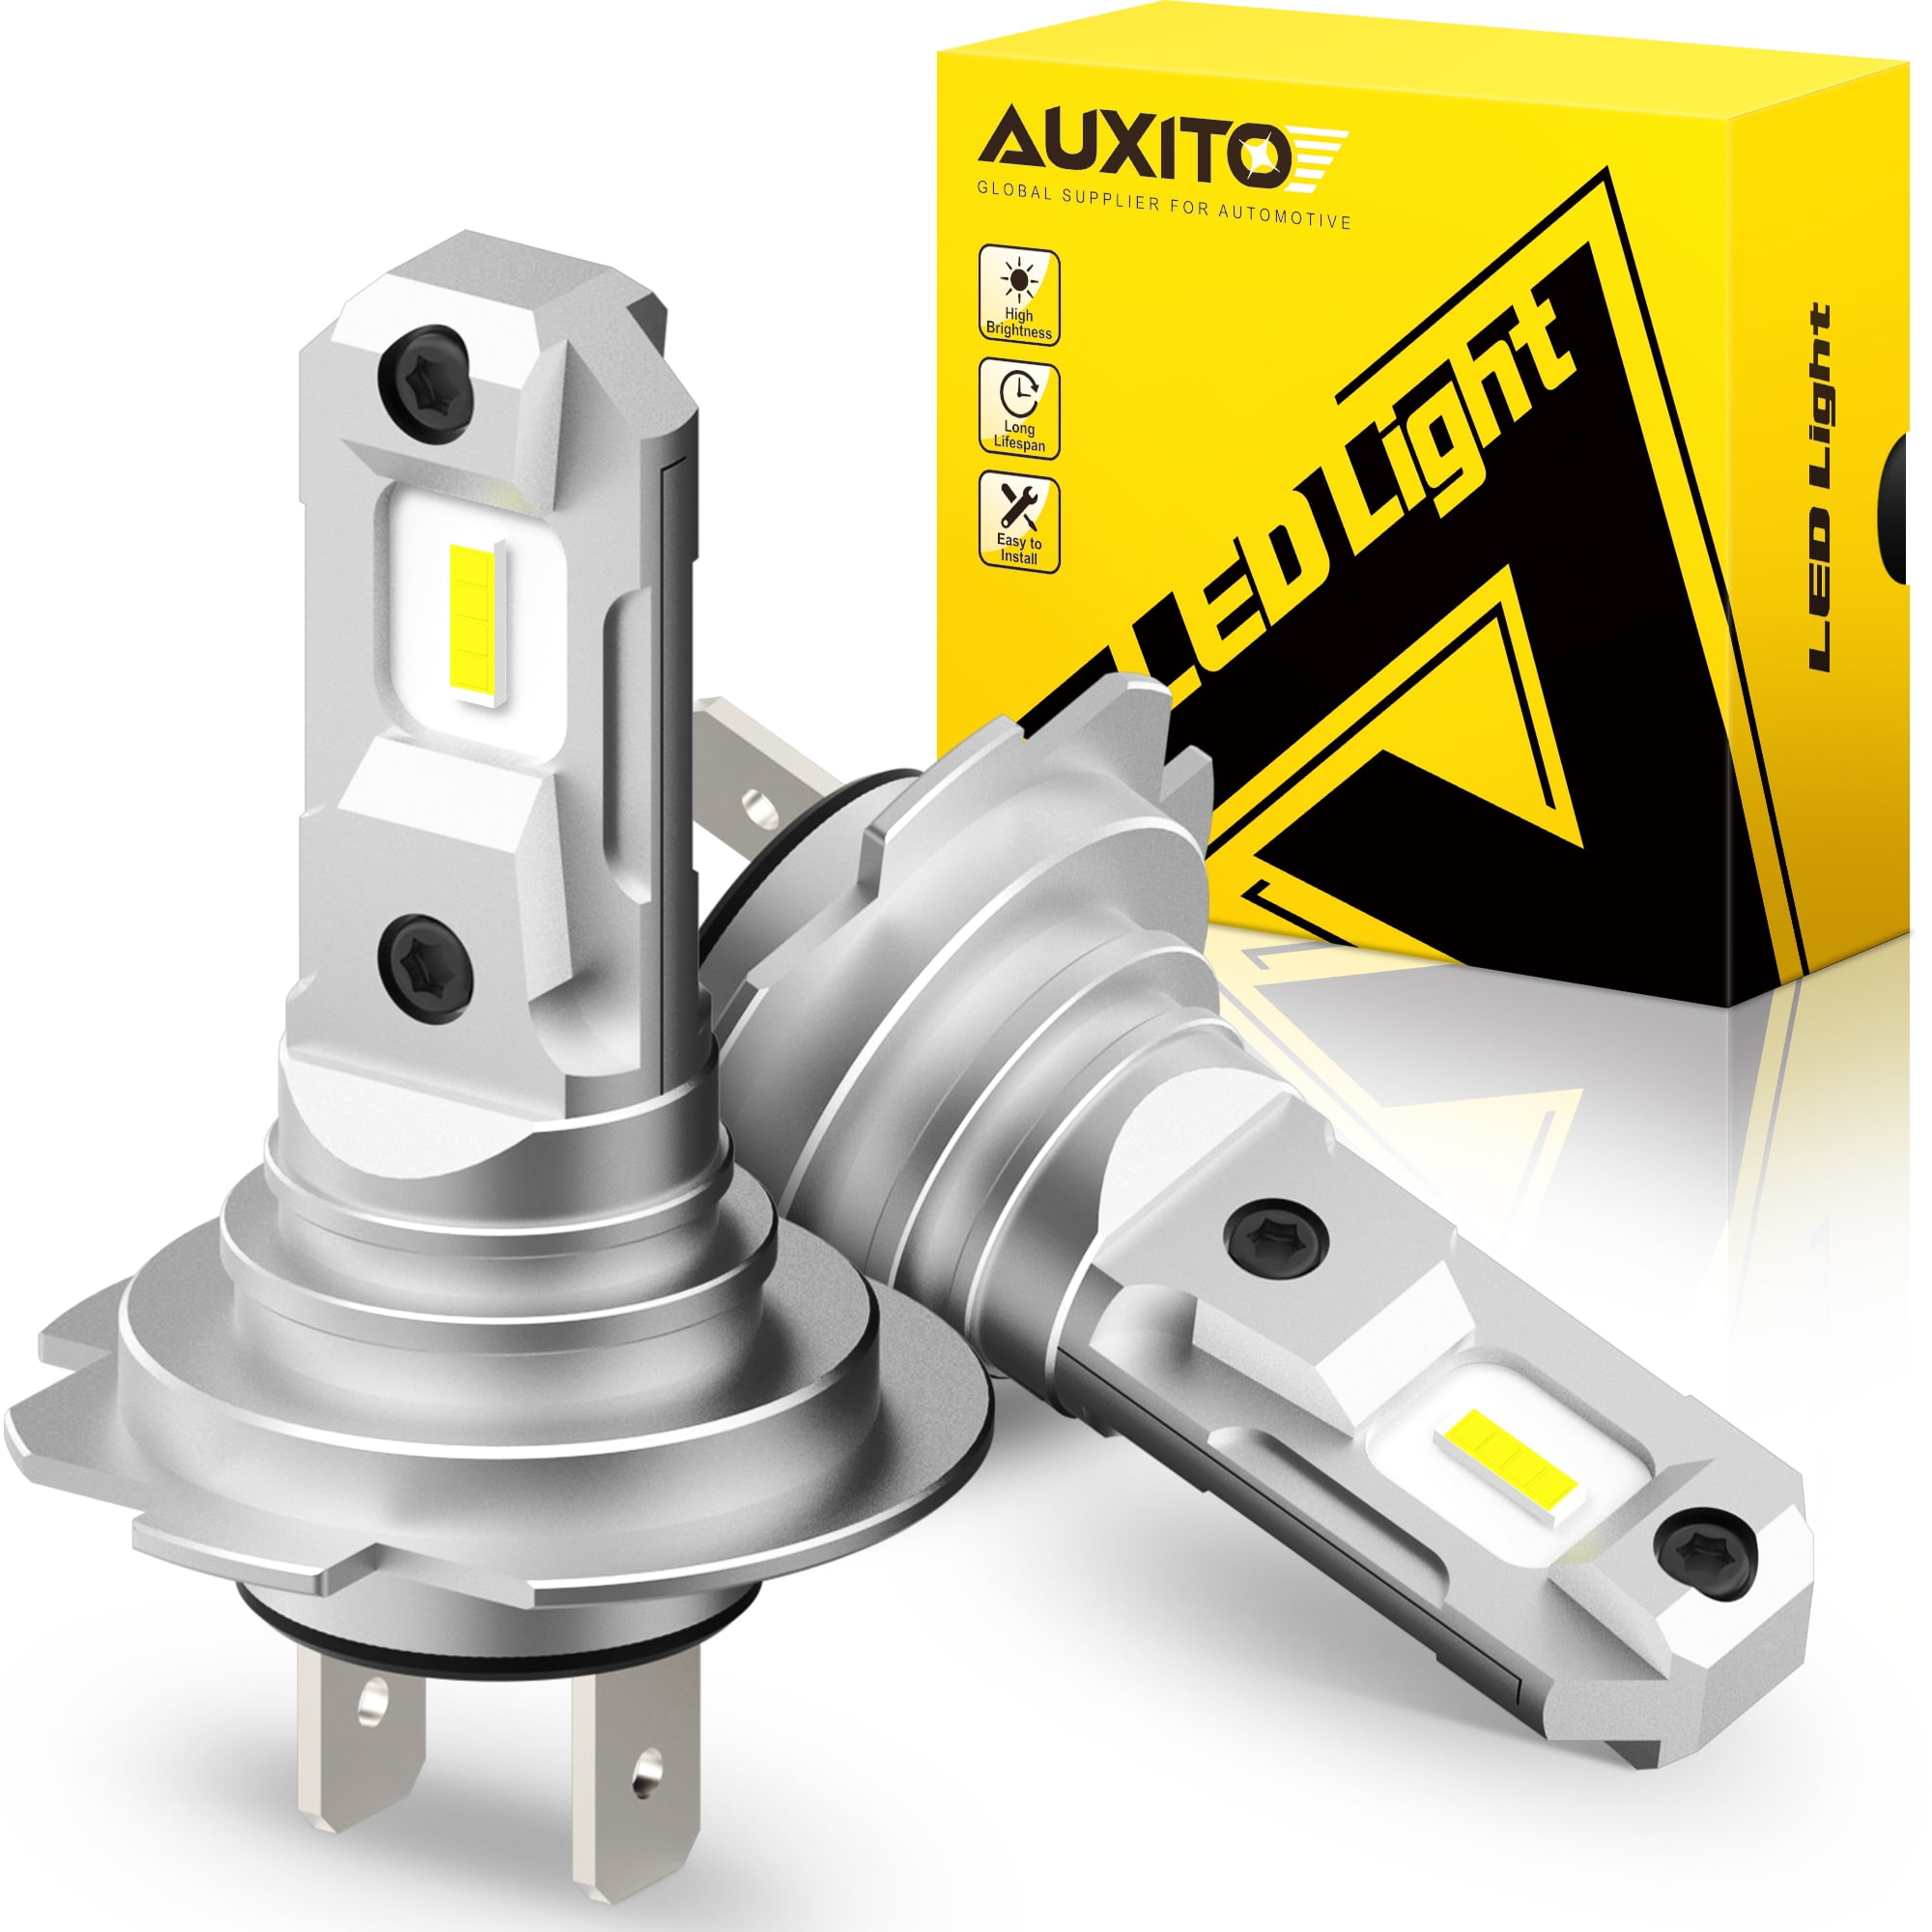 AUXITO H7 LED Headlight Bulb, 1:1 Mini Size , 6500K White, 8 CSP Chips Super Bright , Fanless Fog Lights Halogen Replacement Pack of 2 - Walmart.com